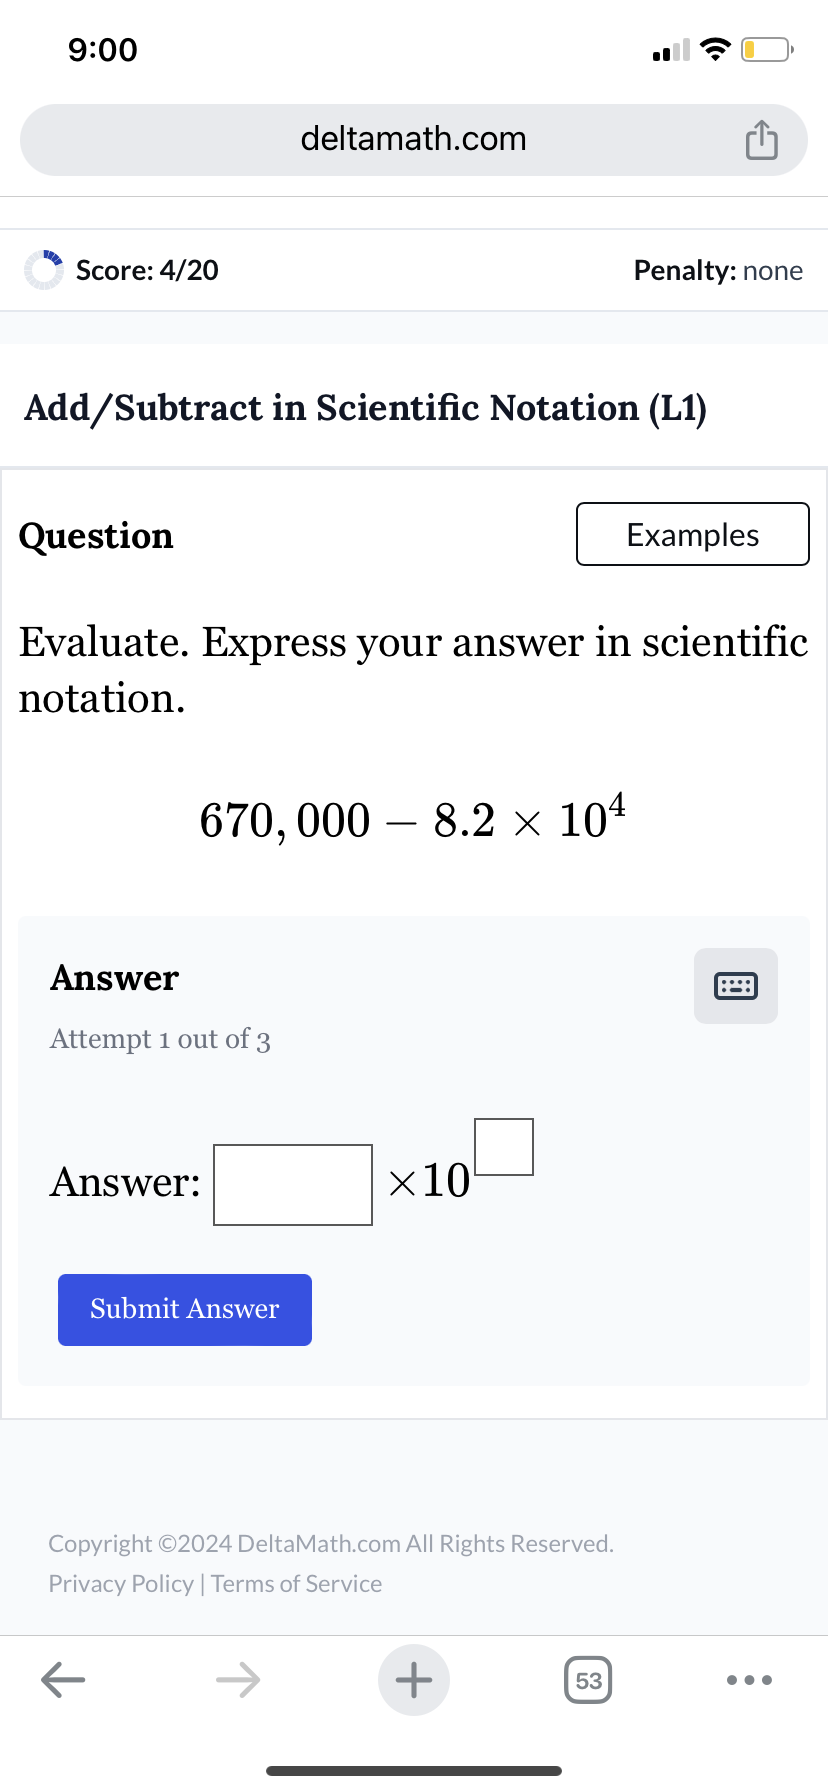 9:00
Score: 4/20
deltamath.com
Penalty: none
Add/Subtract in Scientific Notation (L1)
Question
Examples
Evaluate. Express your answer in scientific
notation.
670,000 - 8.2 × 104
Answer
Attempt 1 out of 3
Answer:
Submit Answer
×10
Copyright ©2024 DeltaMath.com All Rights Reserved.
Privacy Policy | Terms of Service
←
+
53